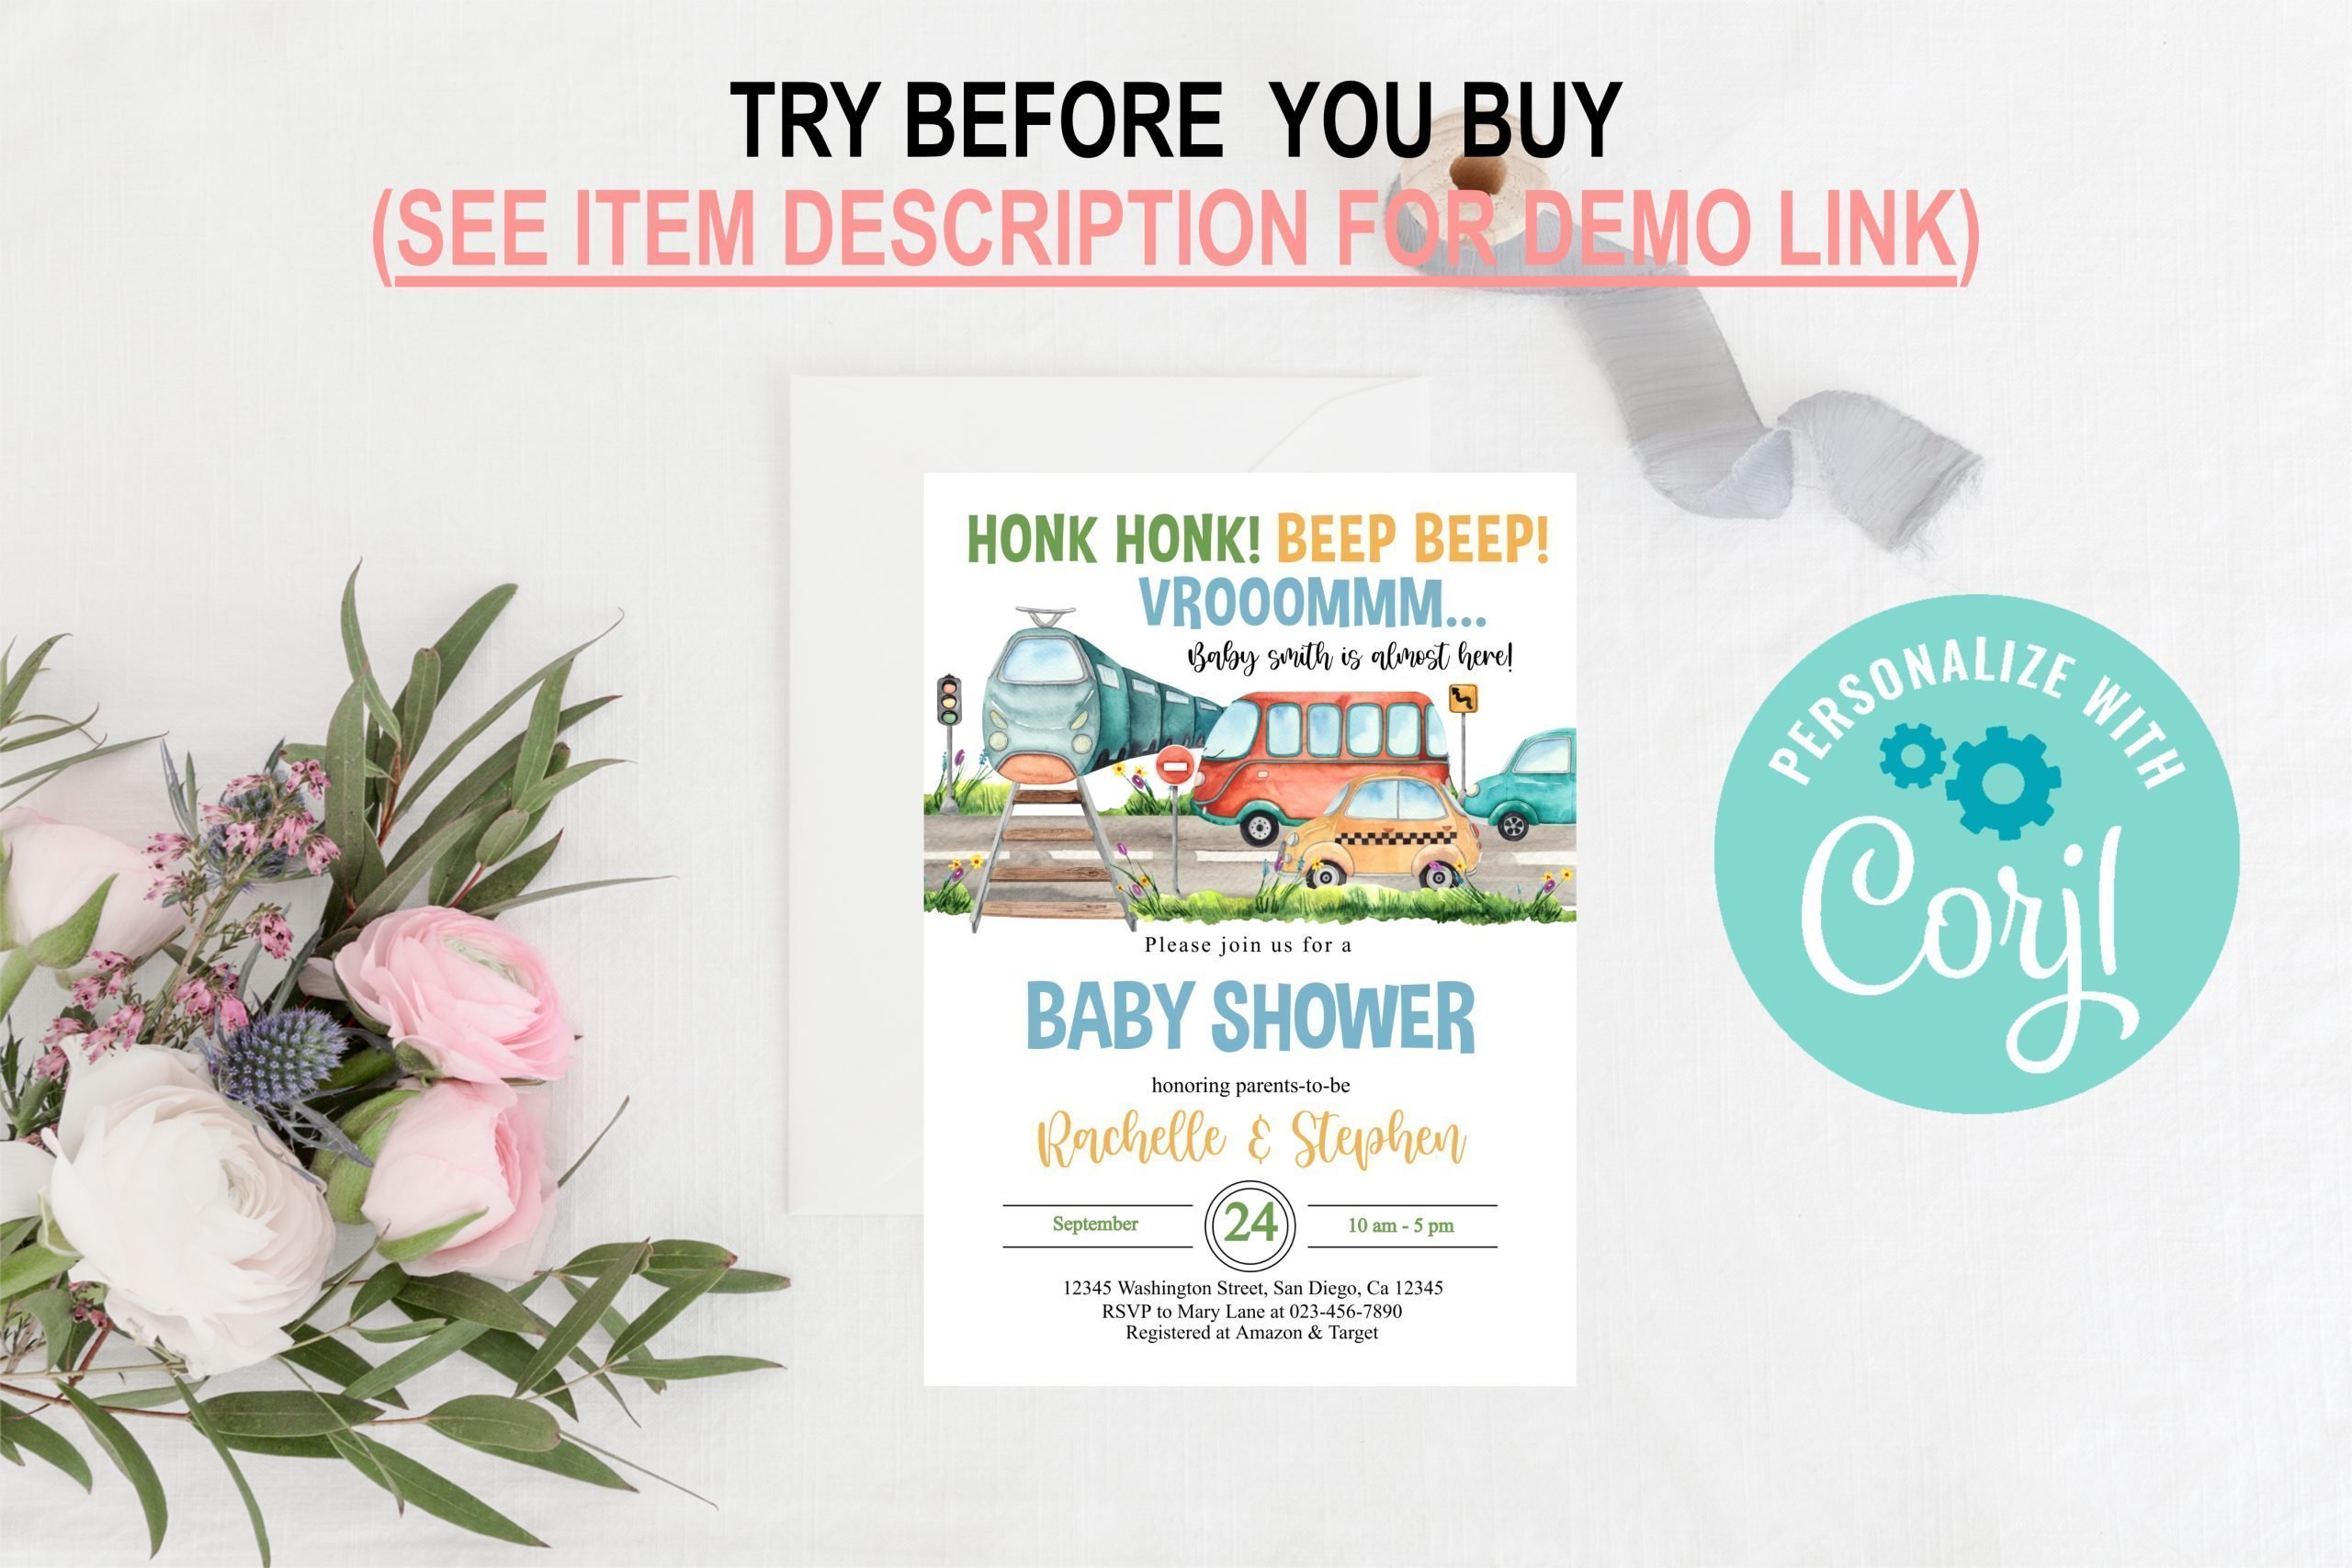 BABY SHOWER Editable Transportation Baby Shower Invitation Vehicles Baby Shower Invite Train Car Bus template 5x7" paper size